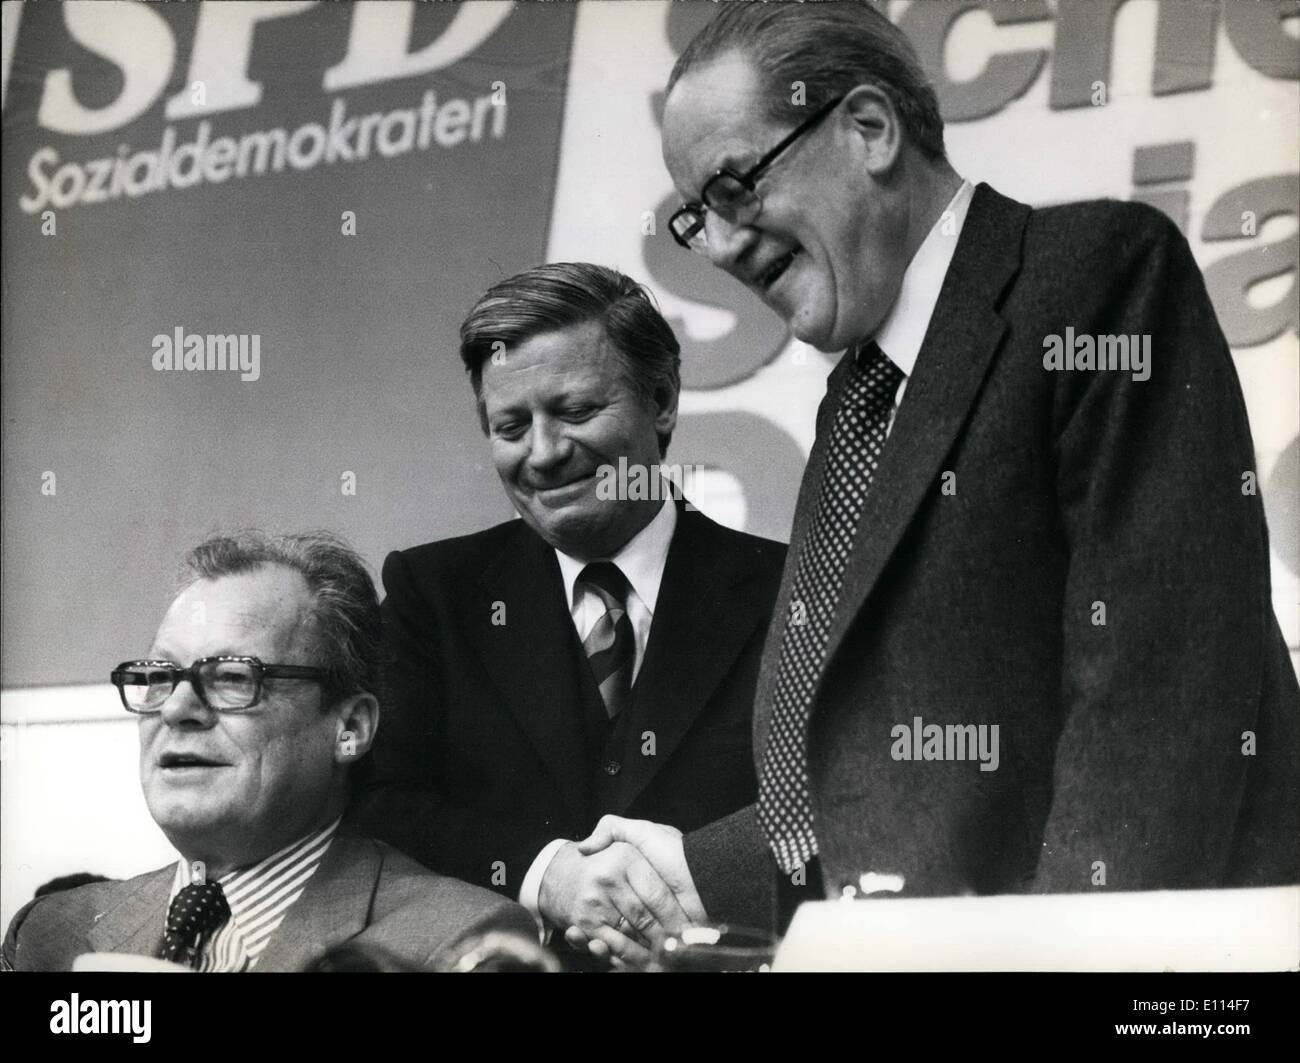 Nov. 11, 1975 - Party Convention of the Federal German Social Democratic party in Manheim.: This year's party convention of the Stock Photo